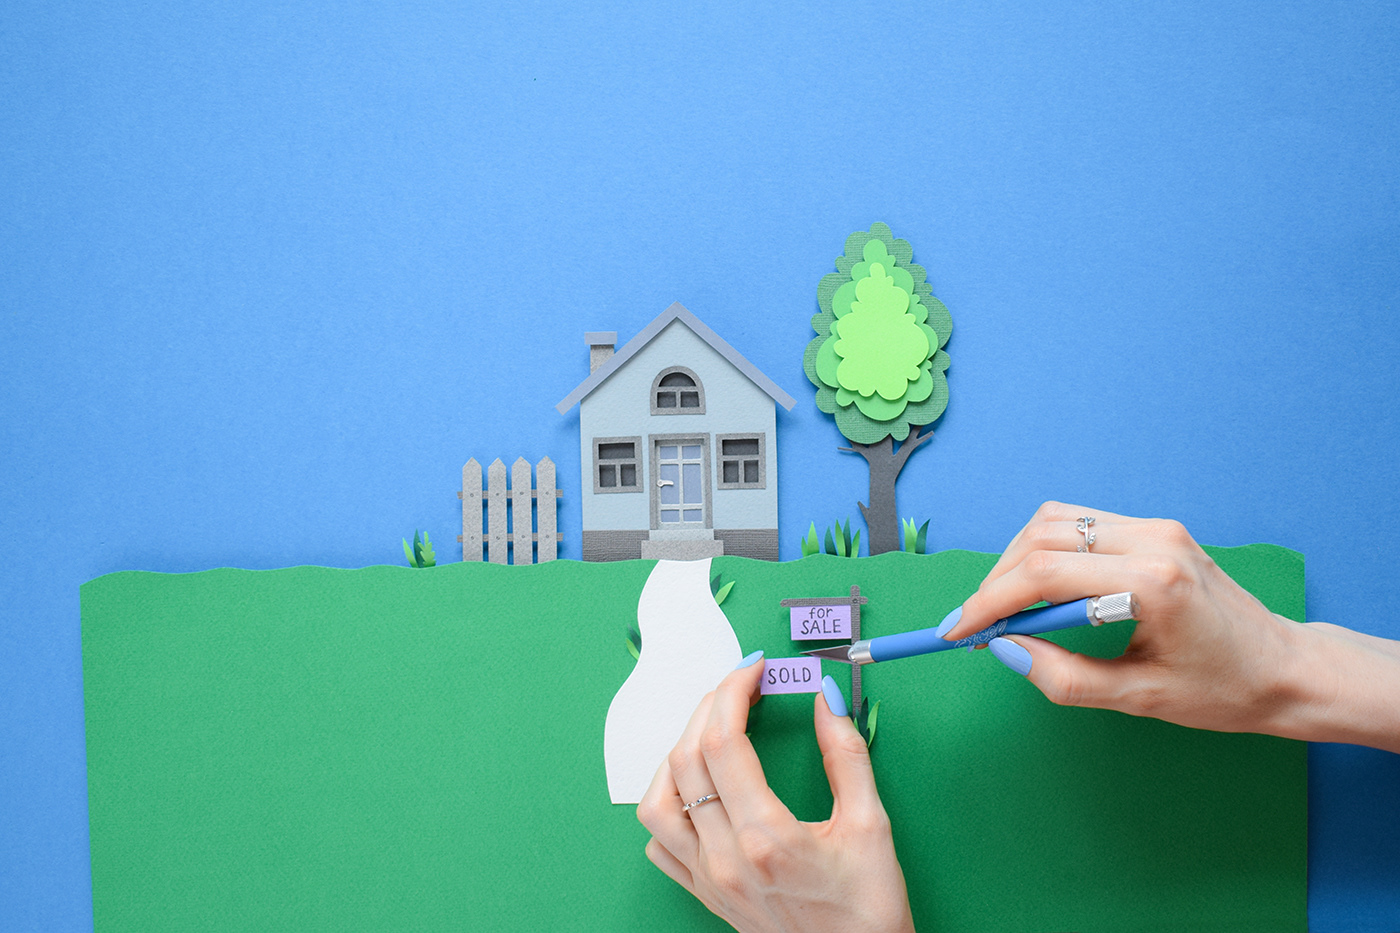 Chase | stop motion animation on Behance